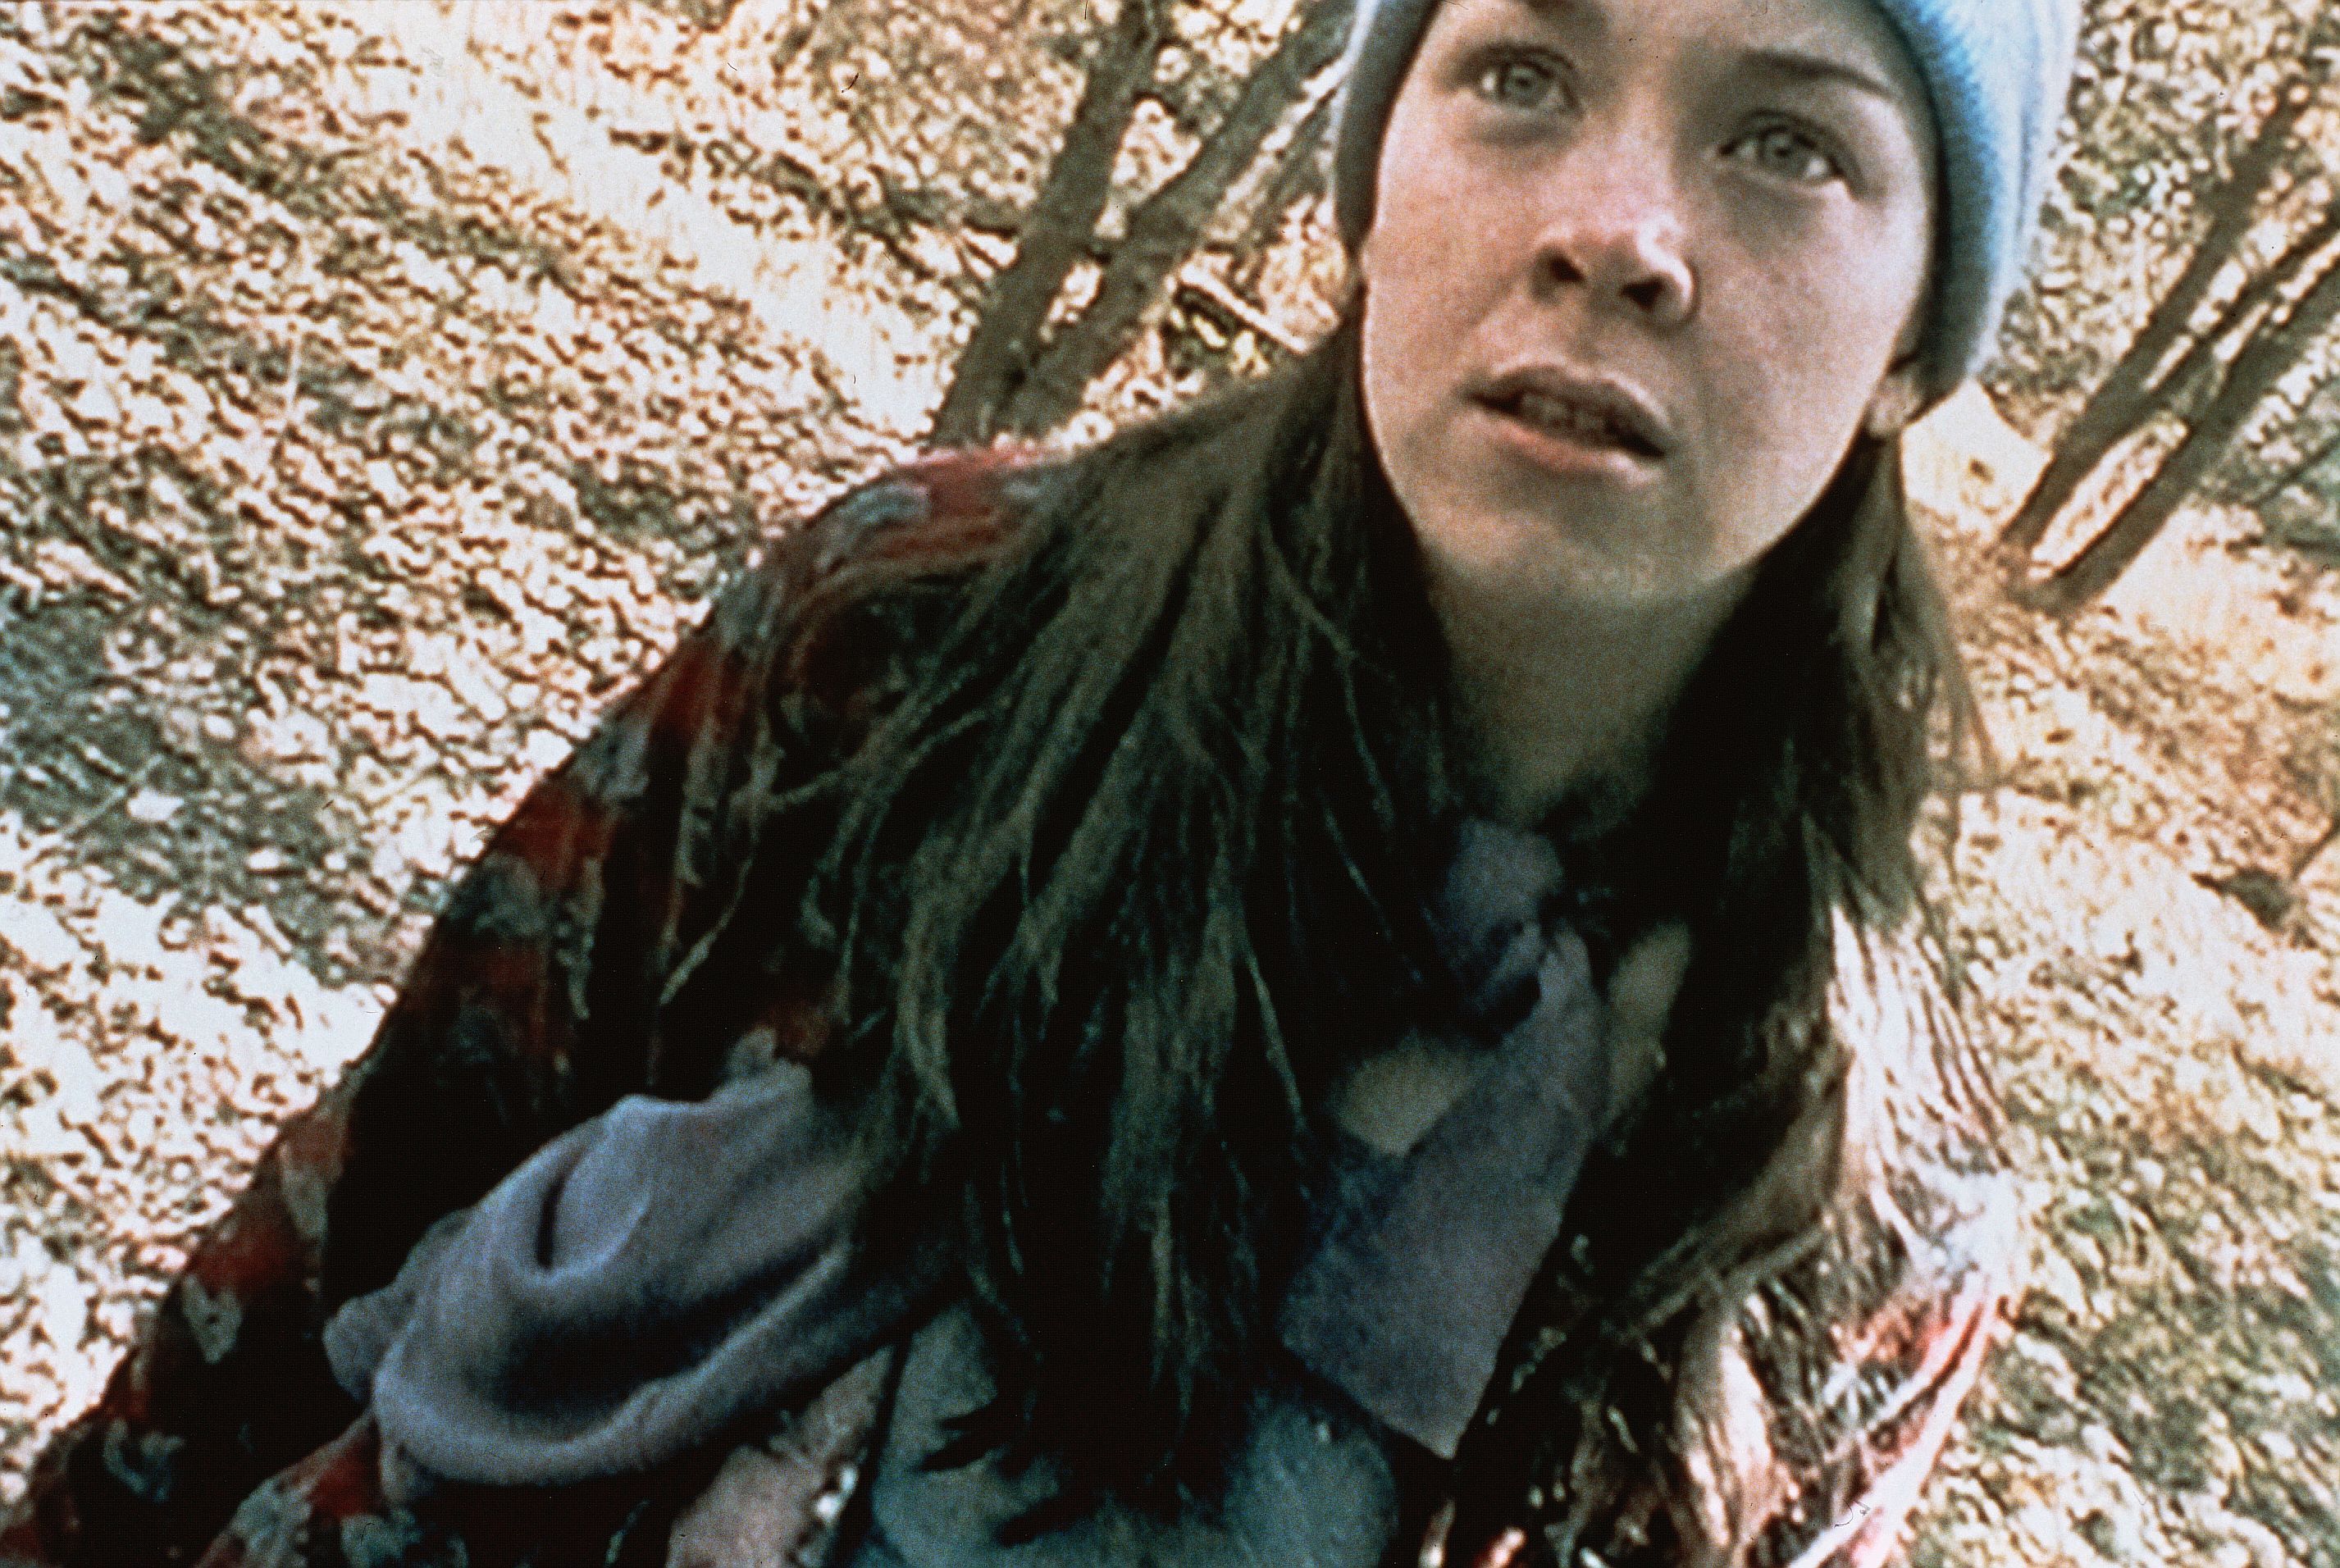 the blair witch project 1999 newsweek